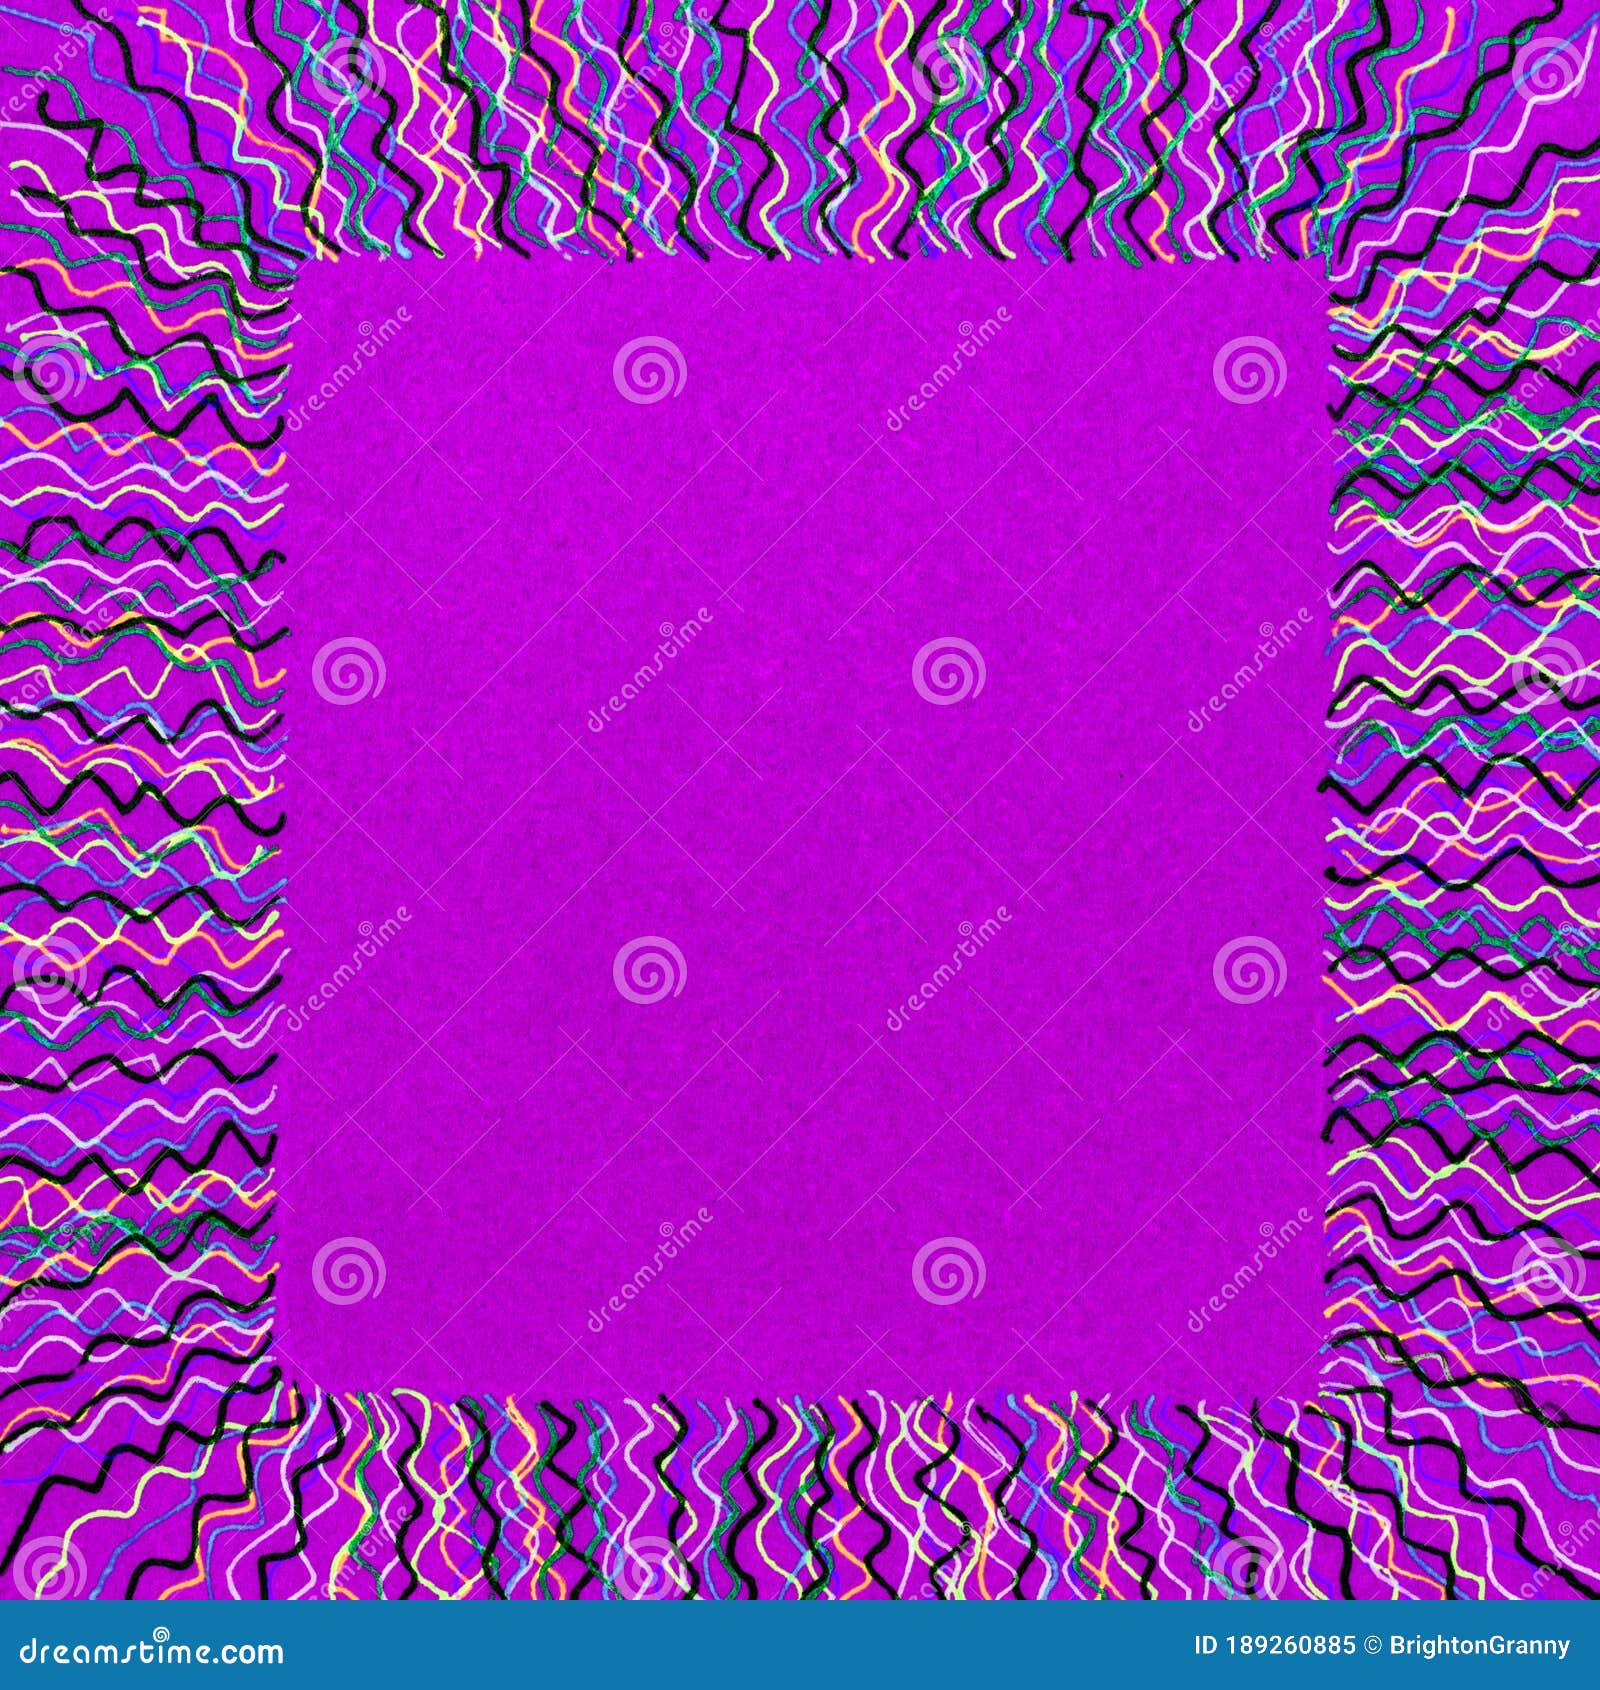 a square frame of squiggles and blank center.